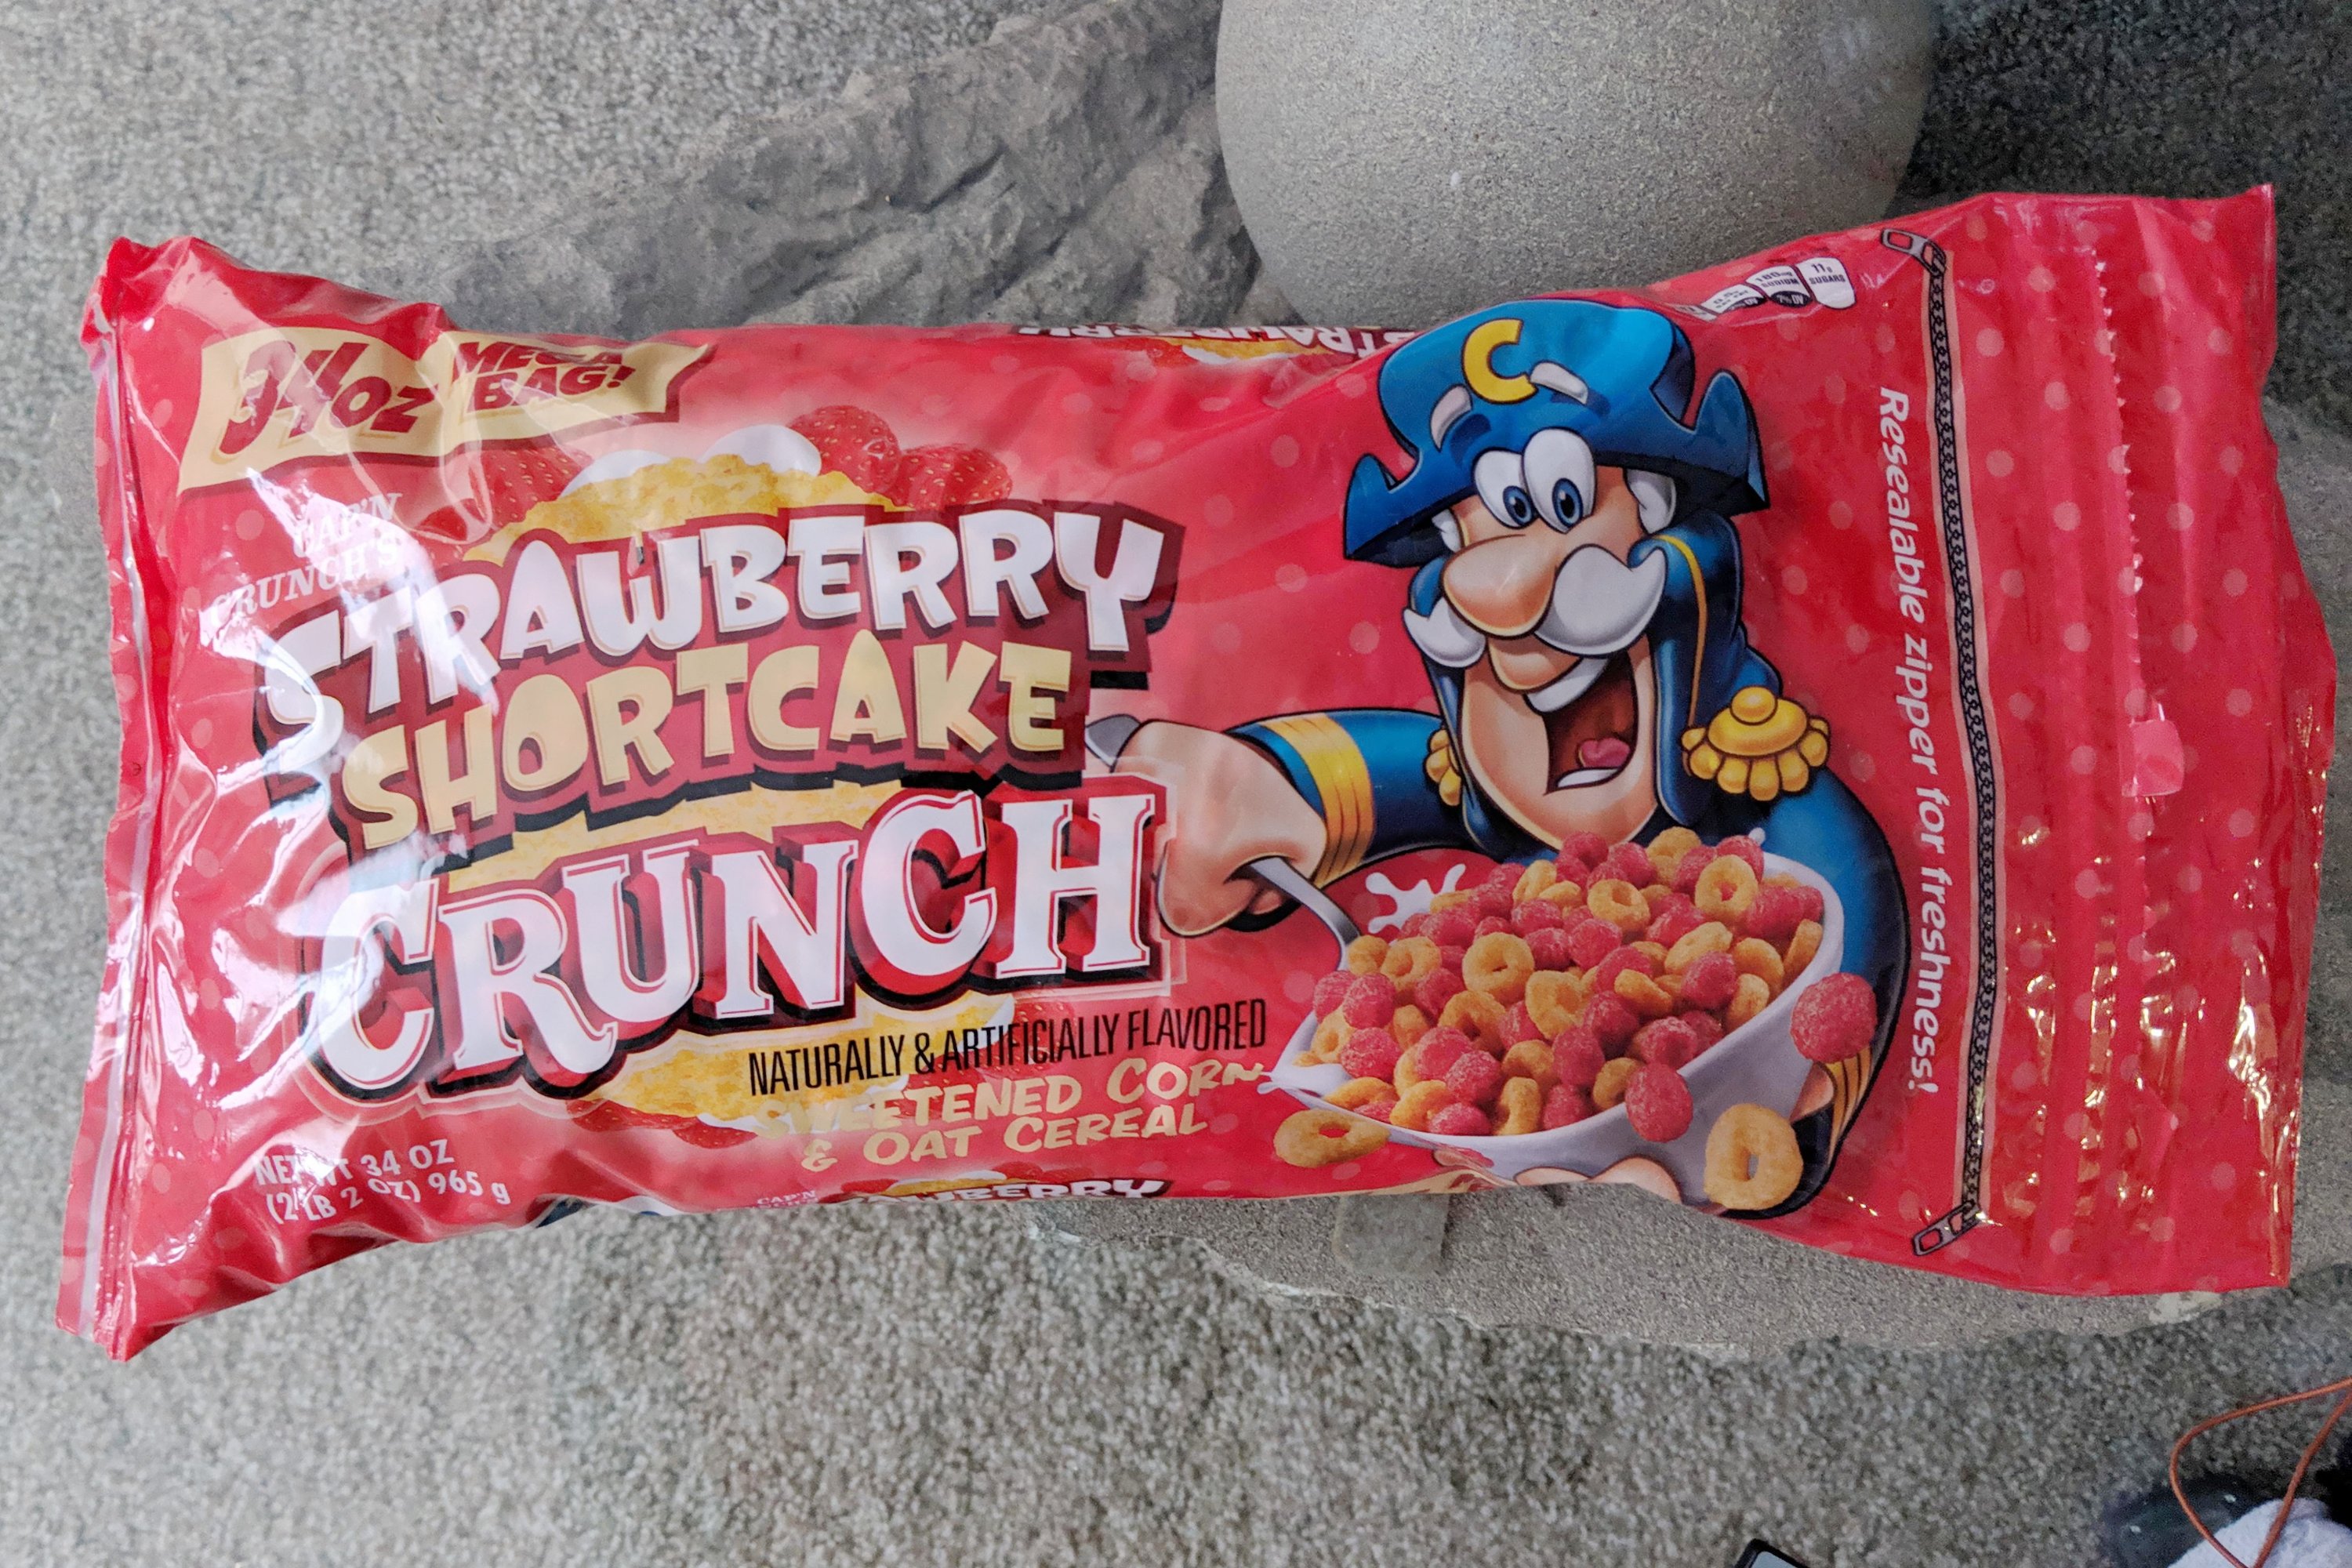 Cap'n Crunch's Strawberry Shortcake Crunch Cereal Review Bag